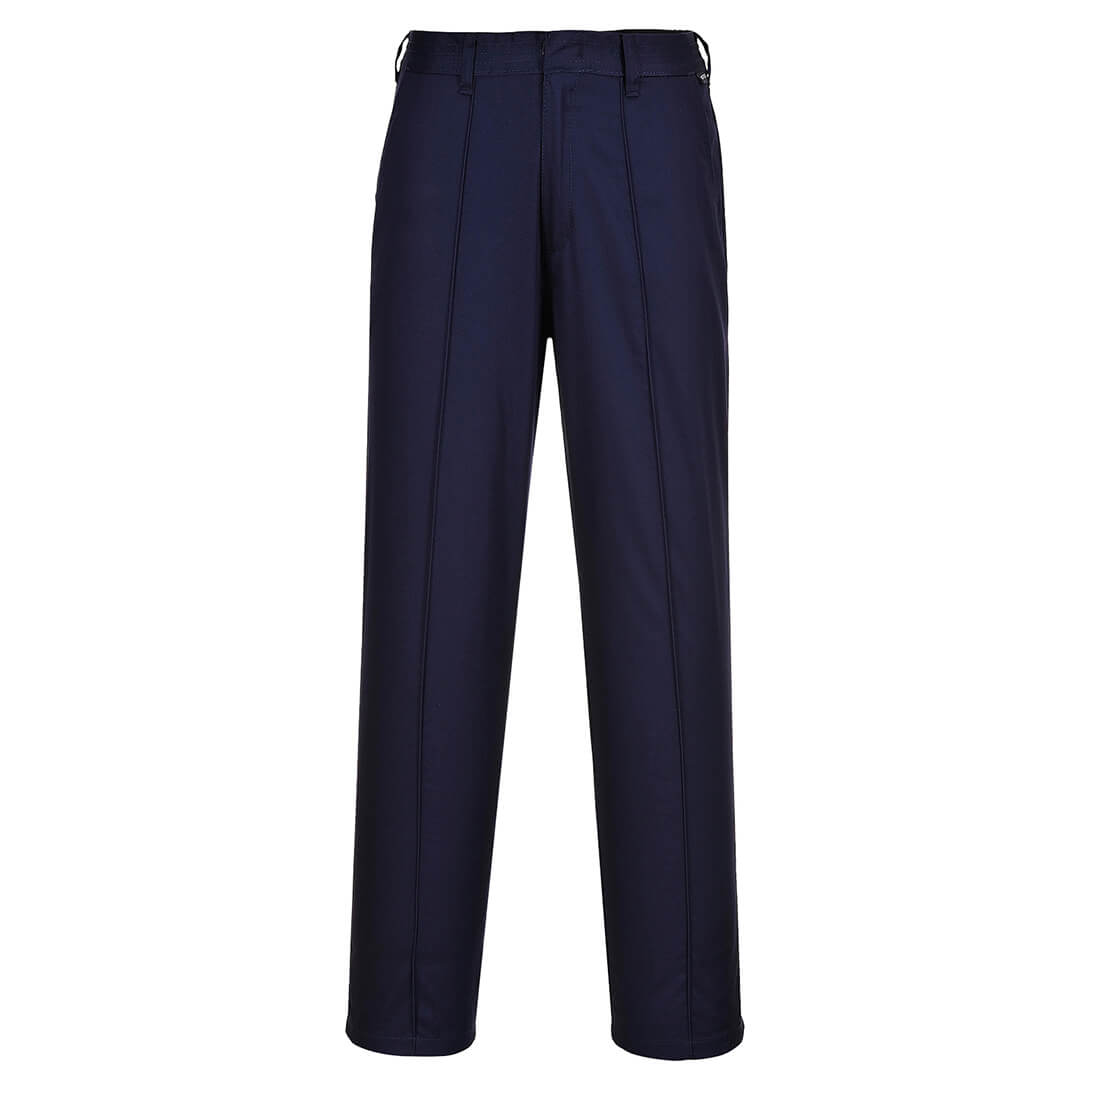 Image of Portwest LW97 ladies Elasticated Trousers Navy Blue S 31"